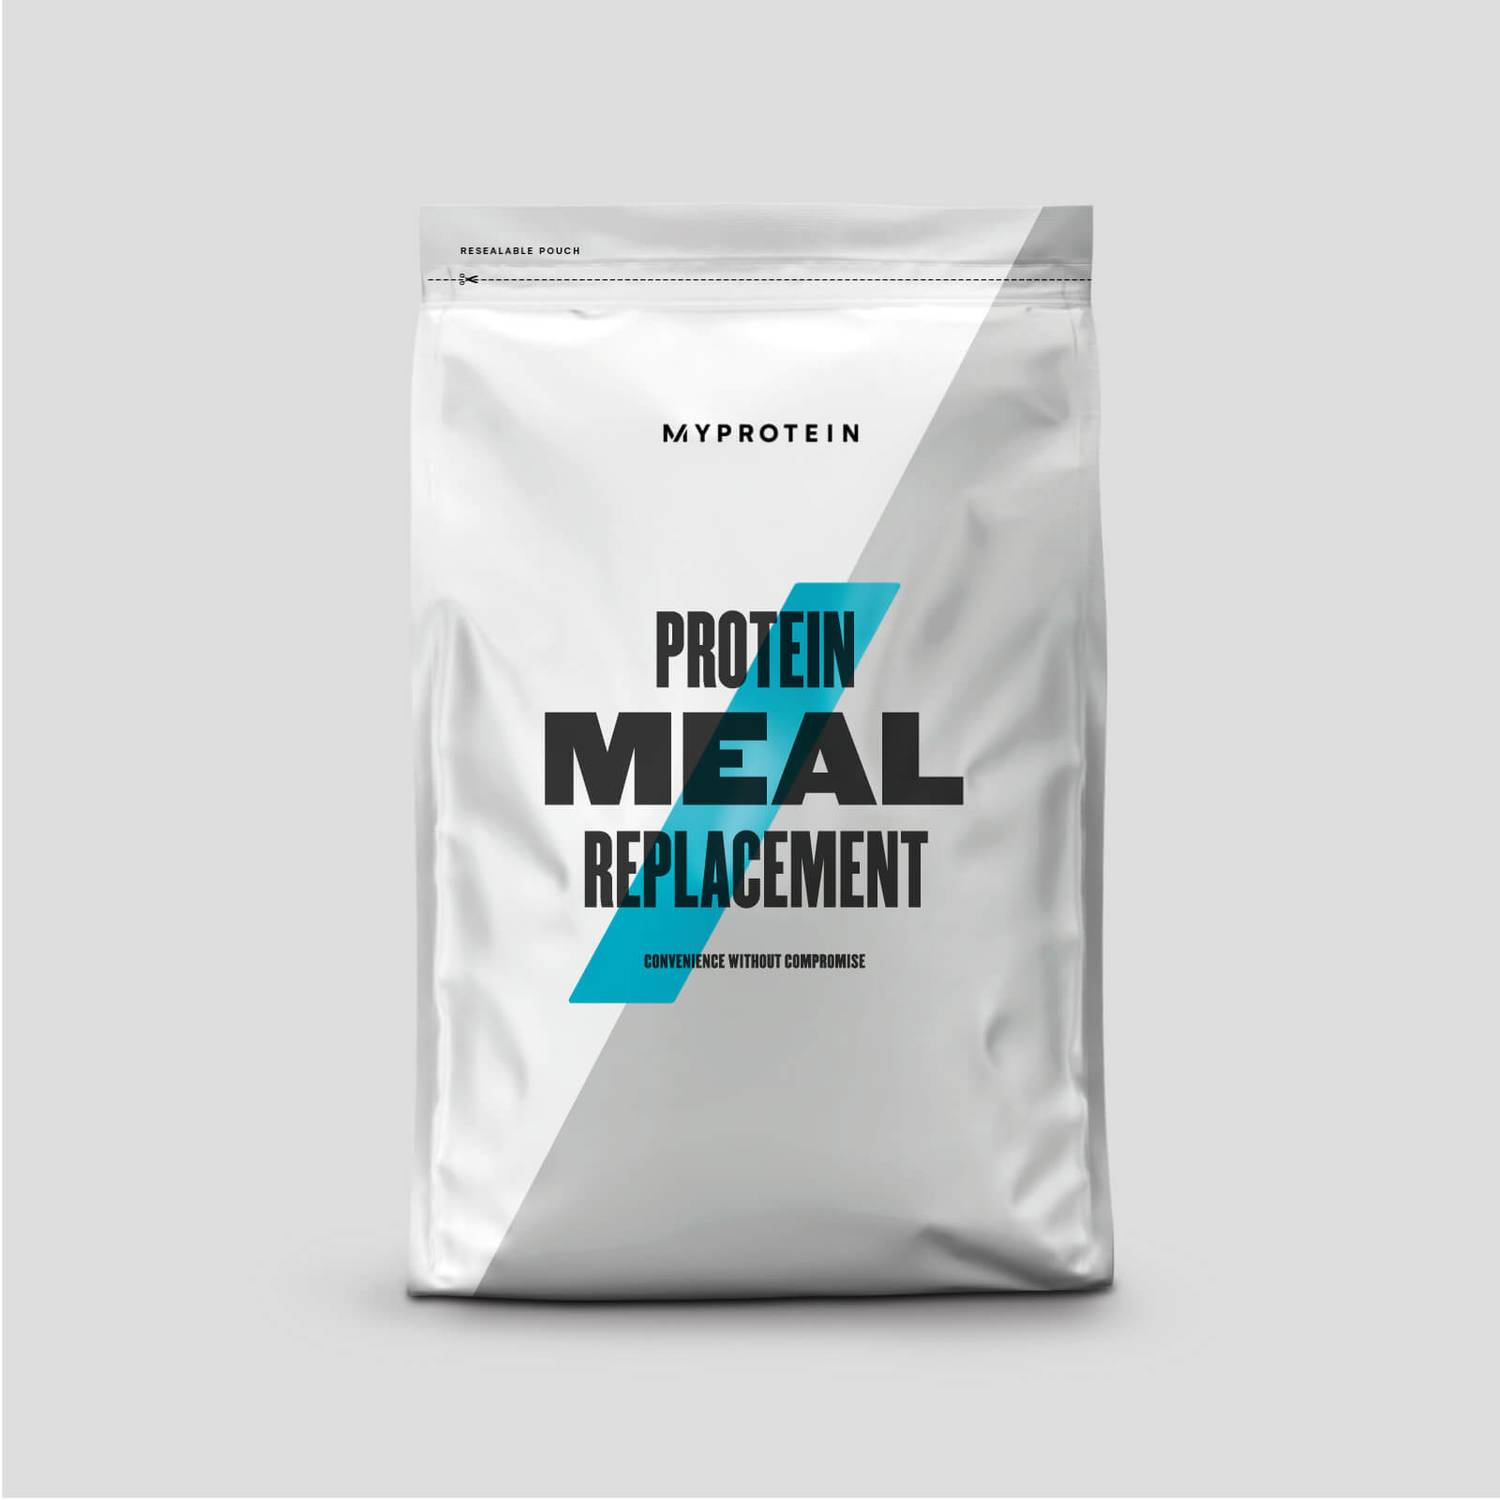 Myprotein protein meal replacement 